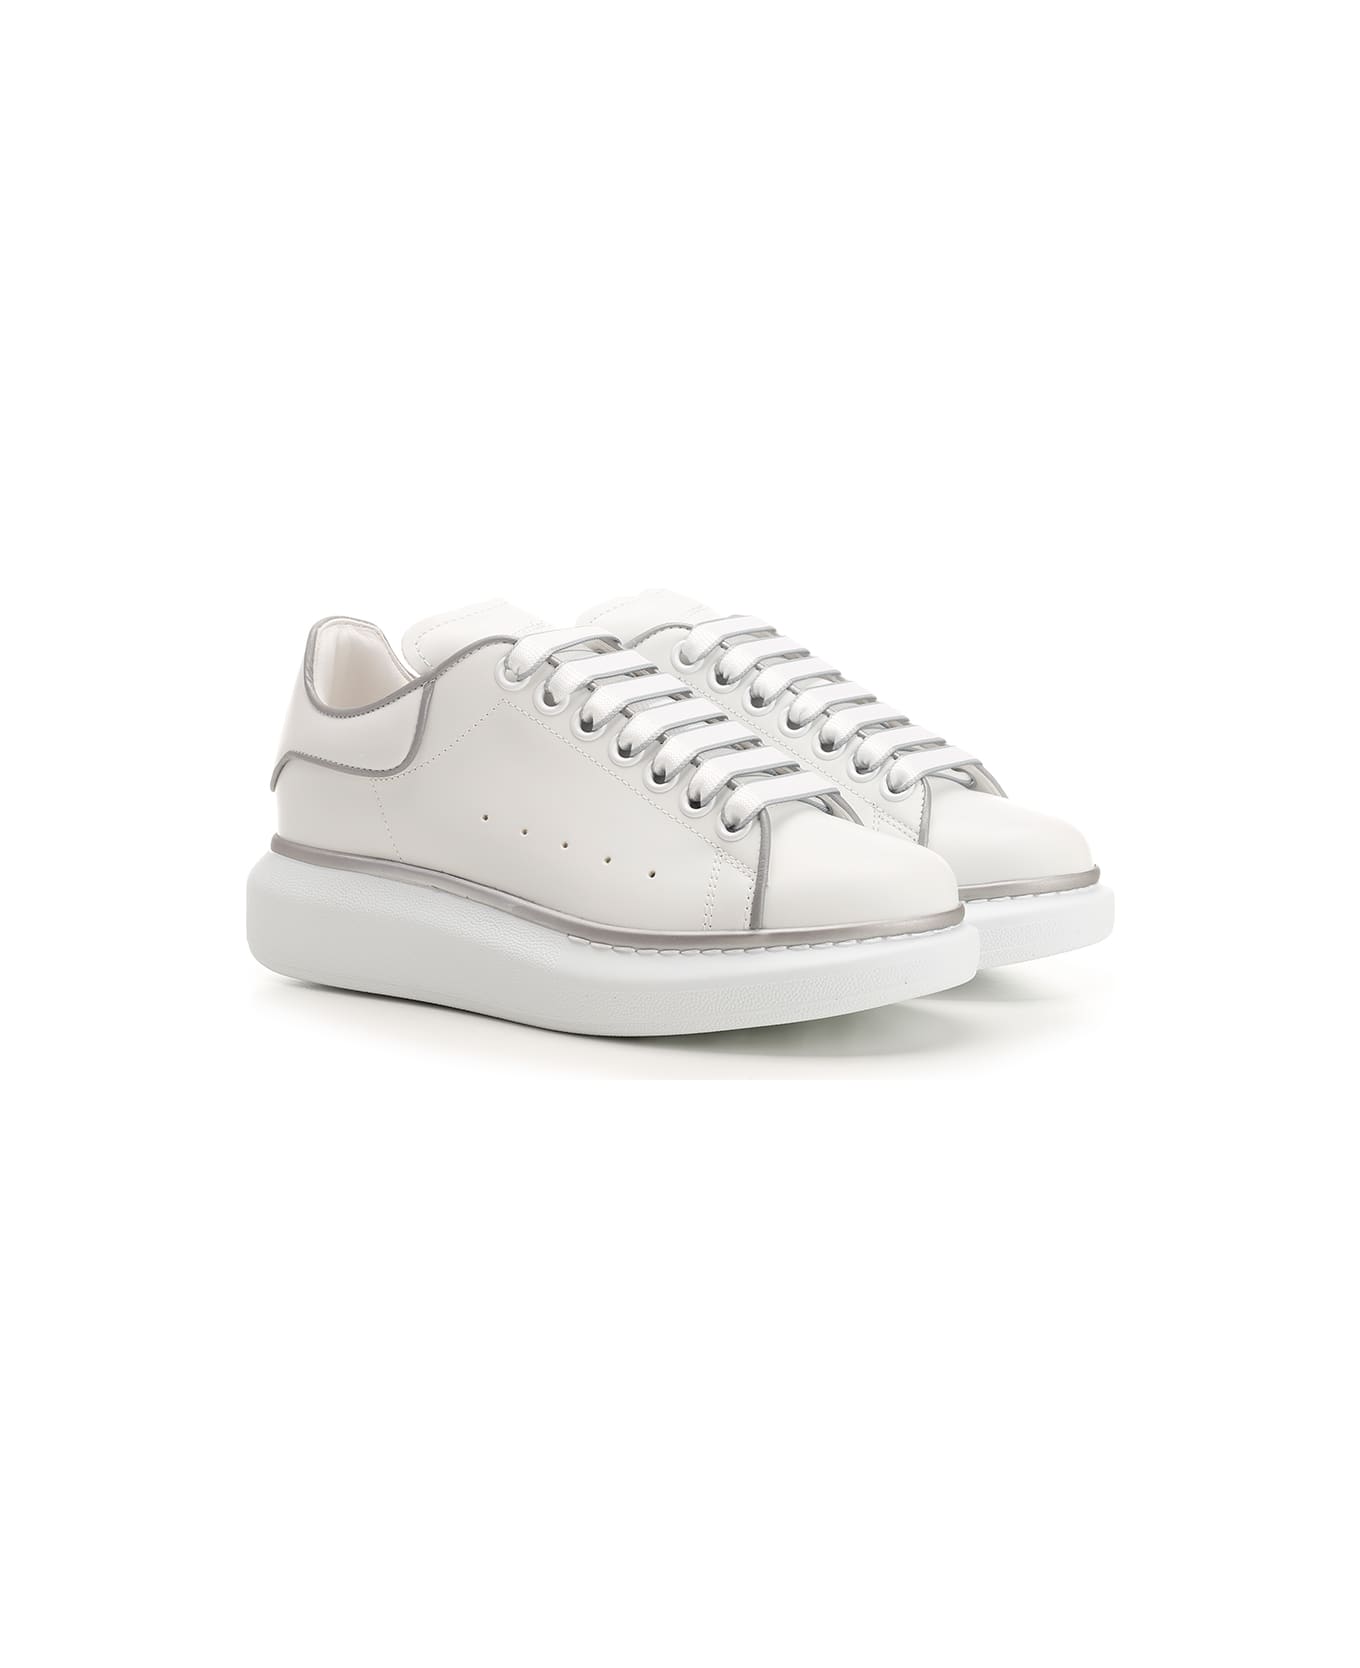 Alexander McQueen White Oversized Sneakers With Silver Piping - White